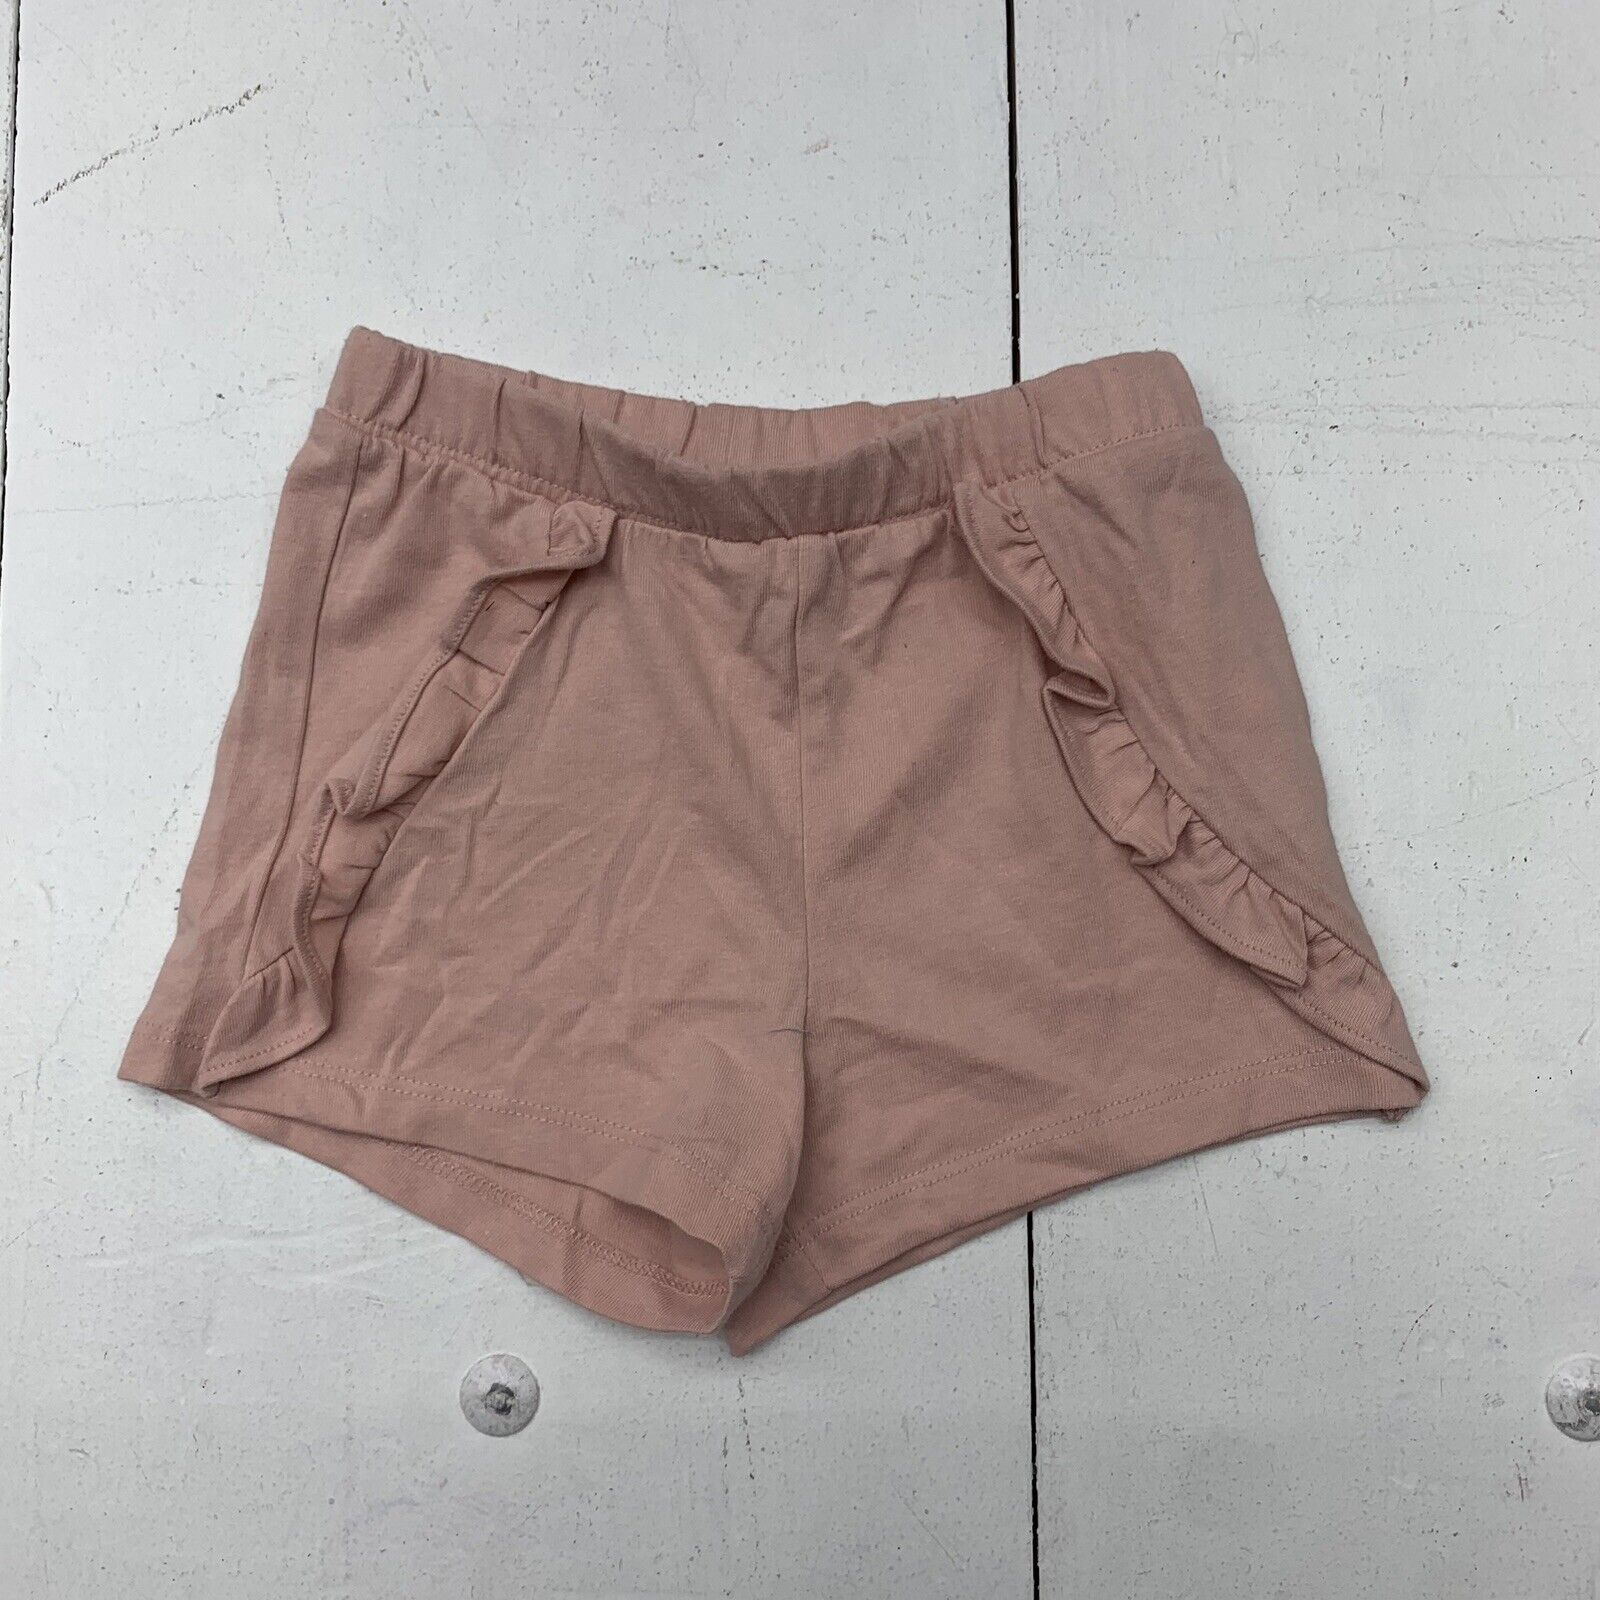 Children’s Place Girls Pink Side Ruffle Shorts Size 4T